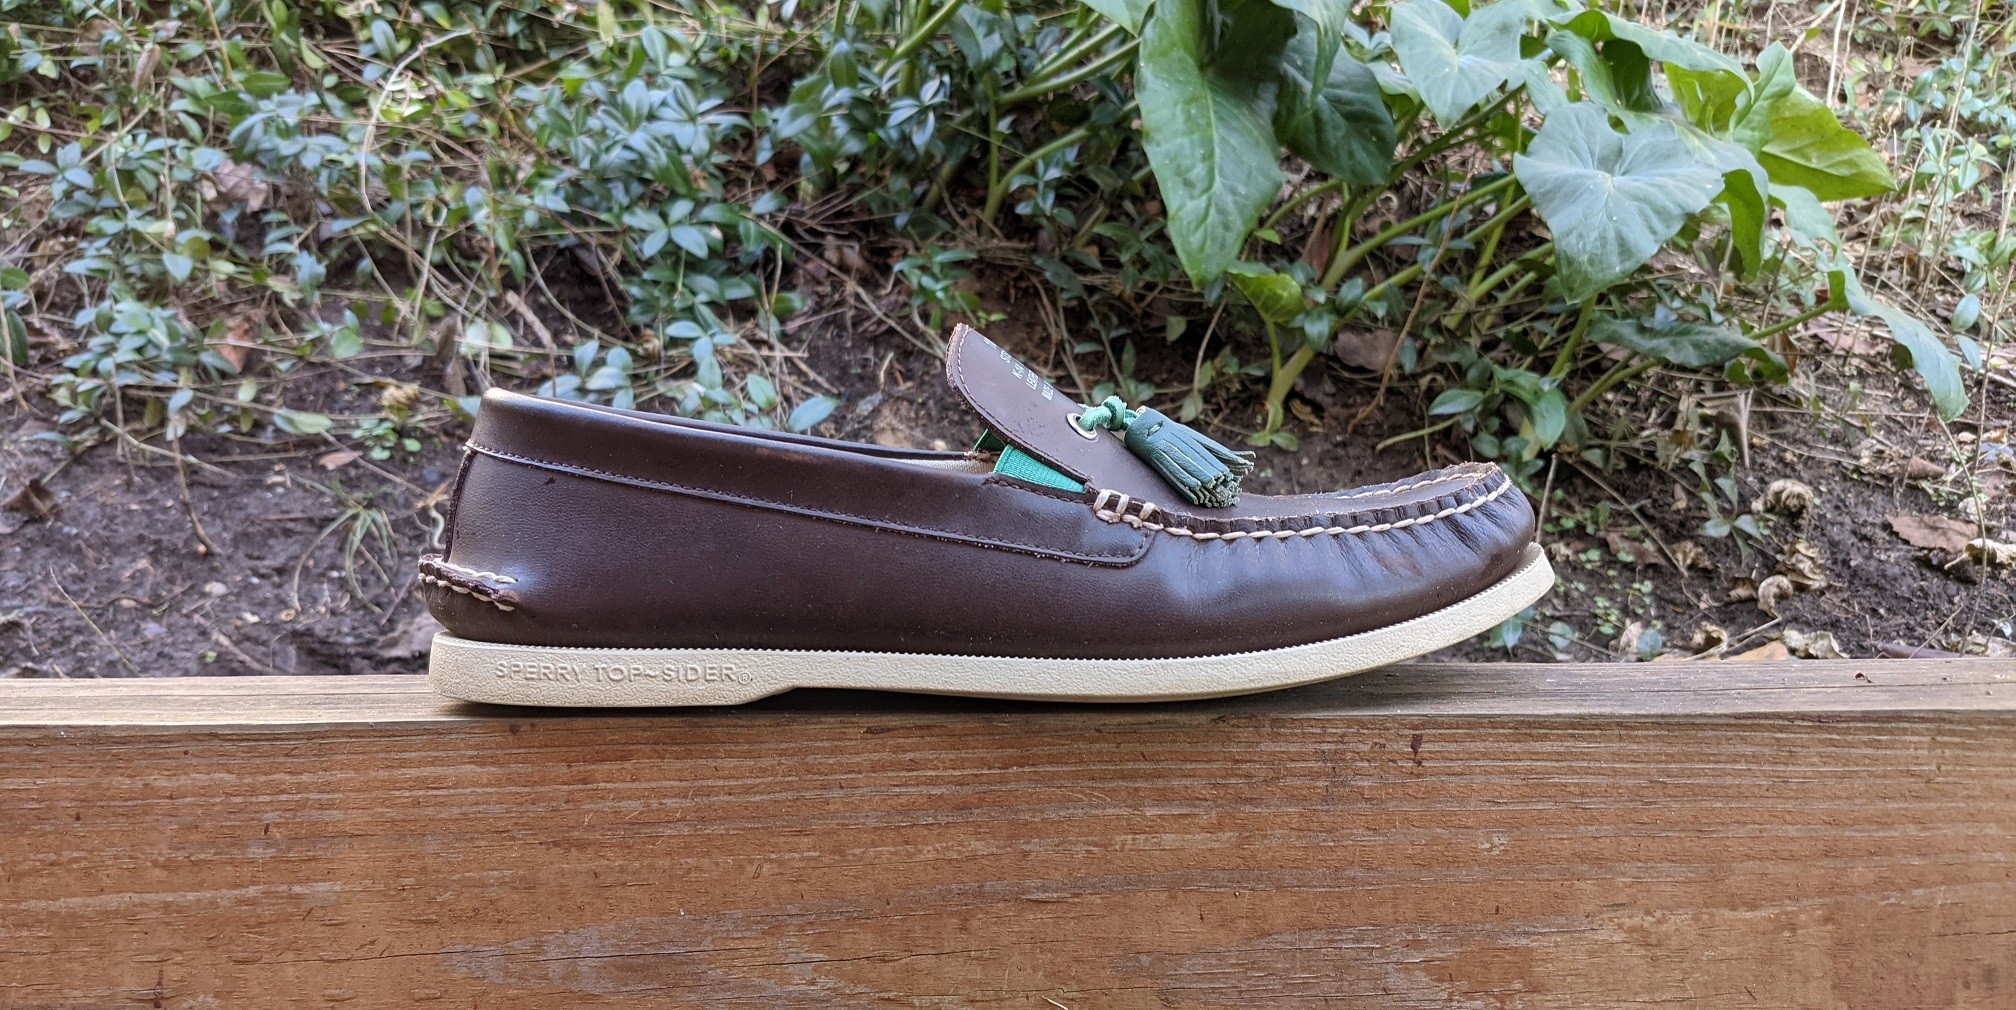 Sperry x Band of Outsiders: 100 Wears In. Does it Hold Up?